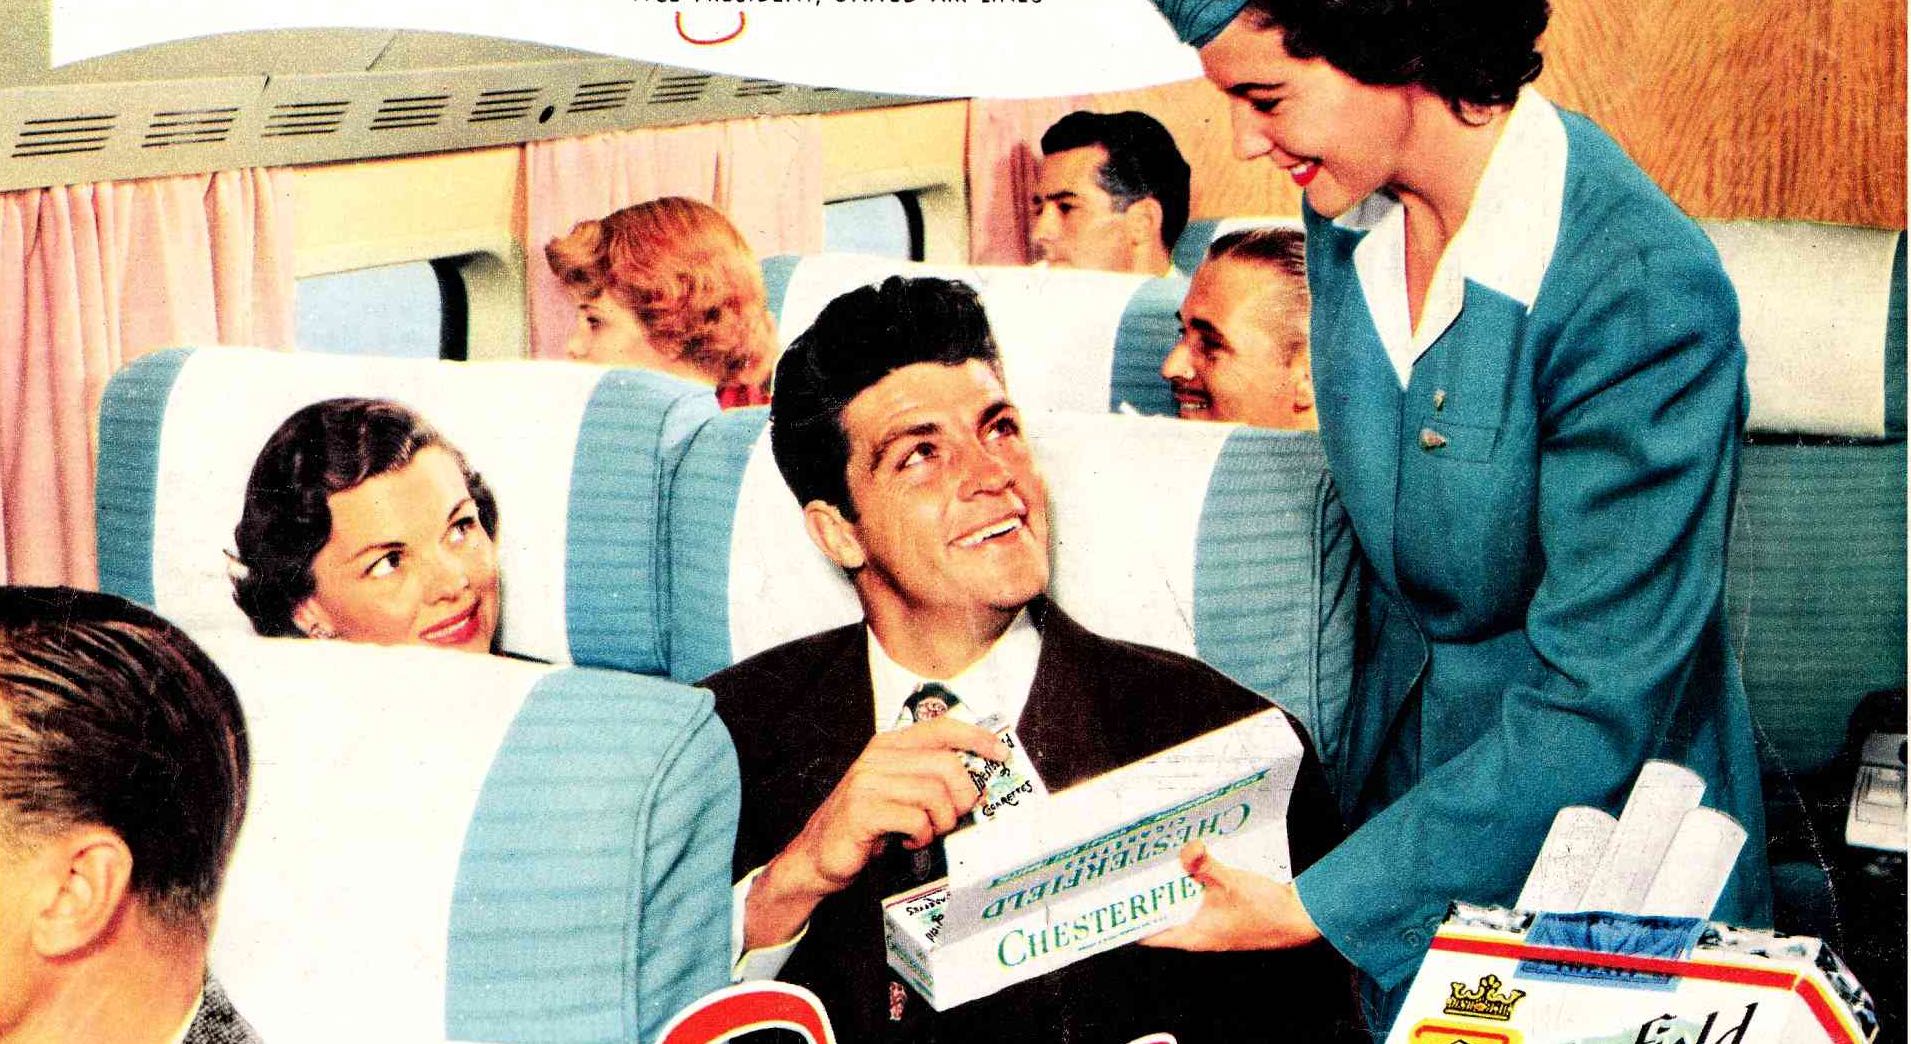 a man sitting in an airplane with a woman serving a box of cigarettes